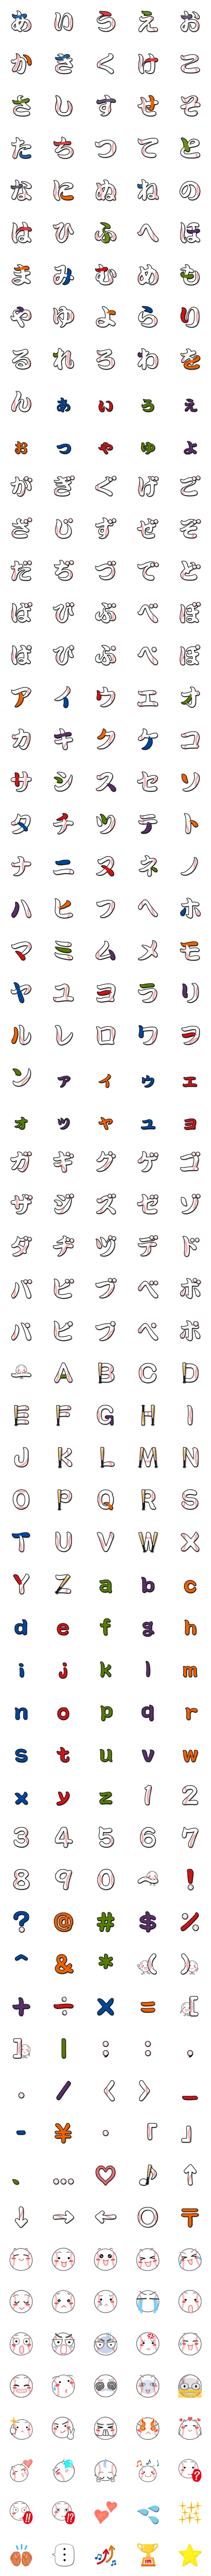 [LINE絵文字]野球を楽しもう！！【デコ文字＆絵文字】の画像一覧